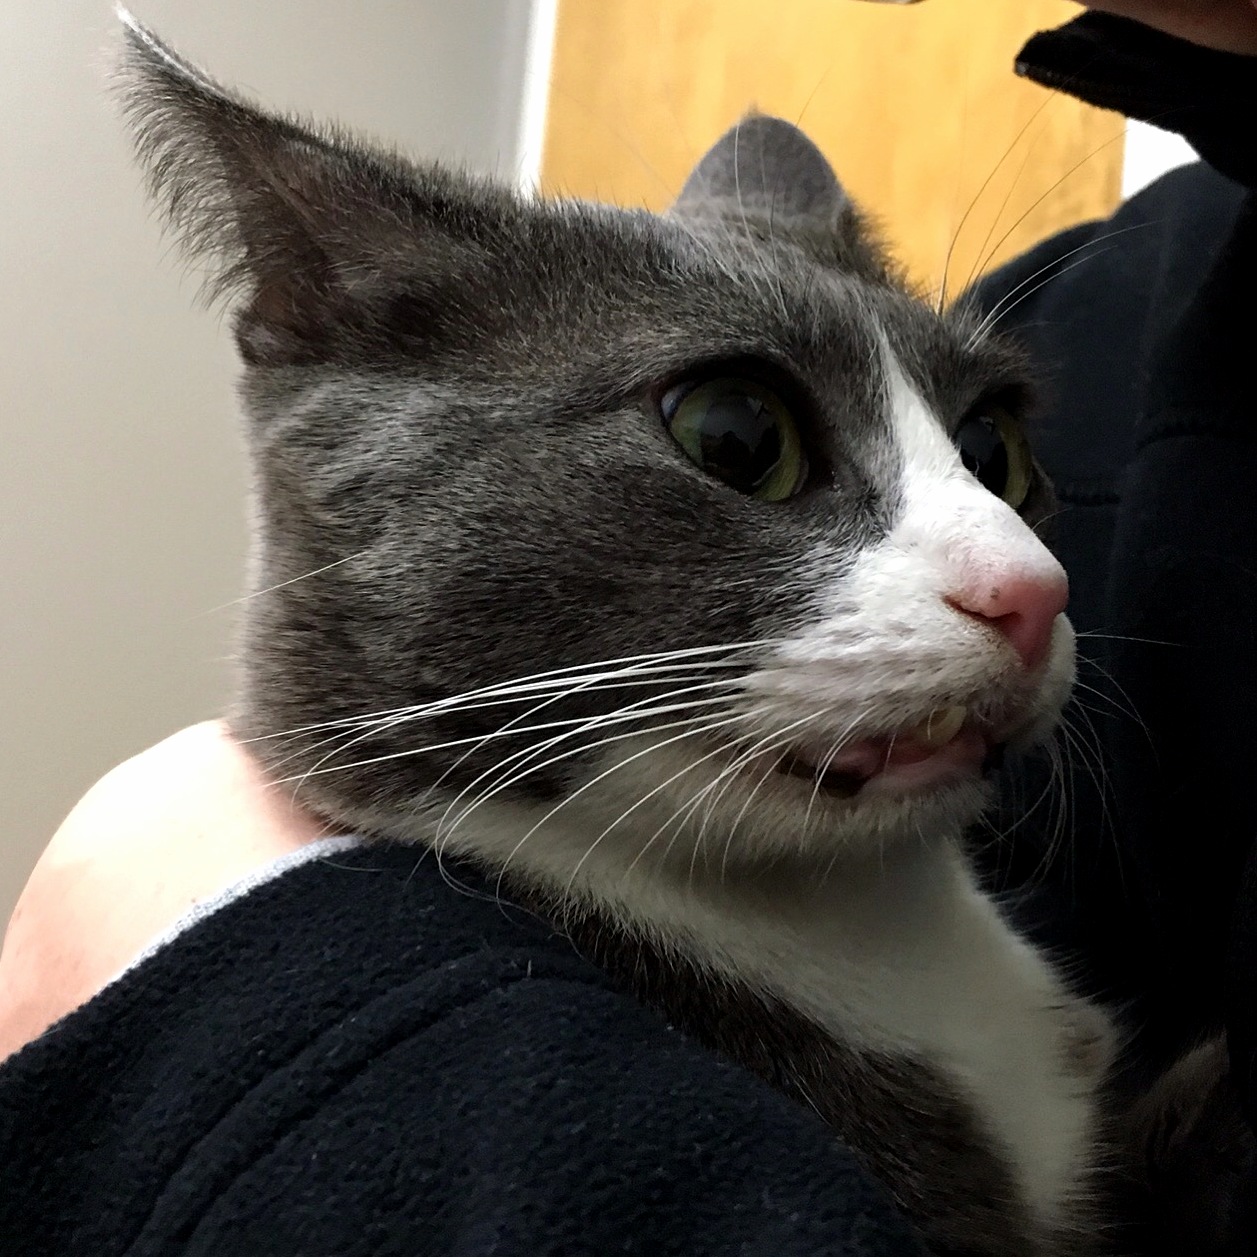 This was the actual expression on my cats face immediately after her rectal exam at the vet.